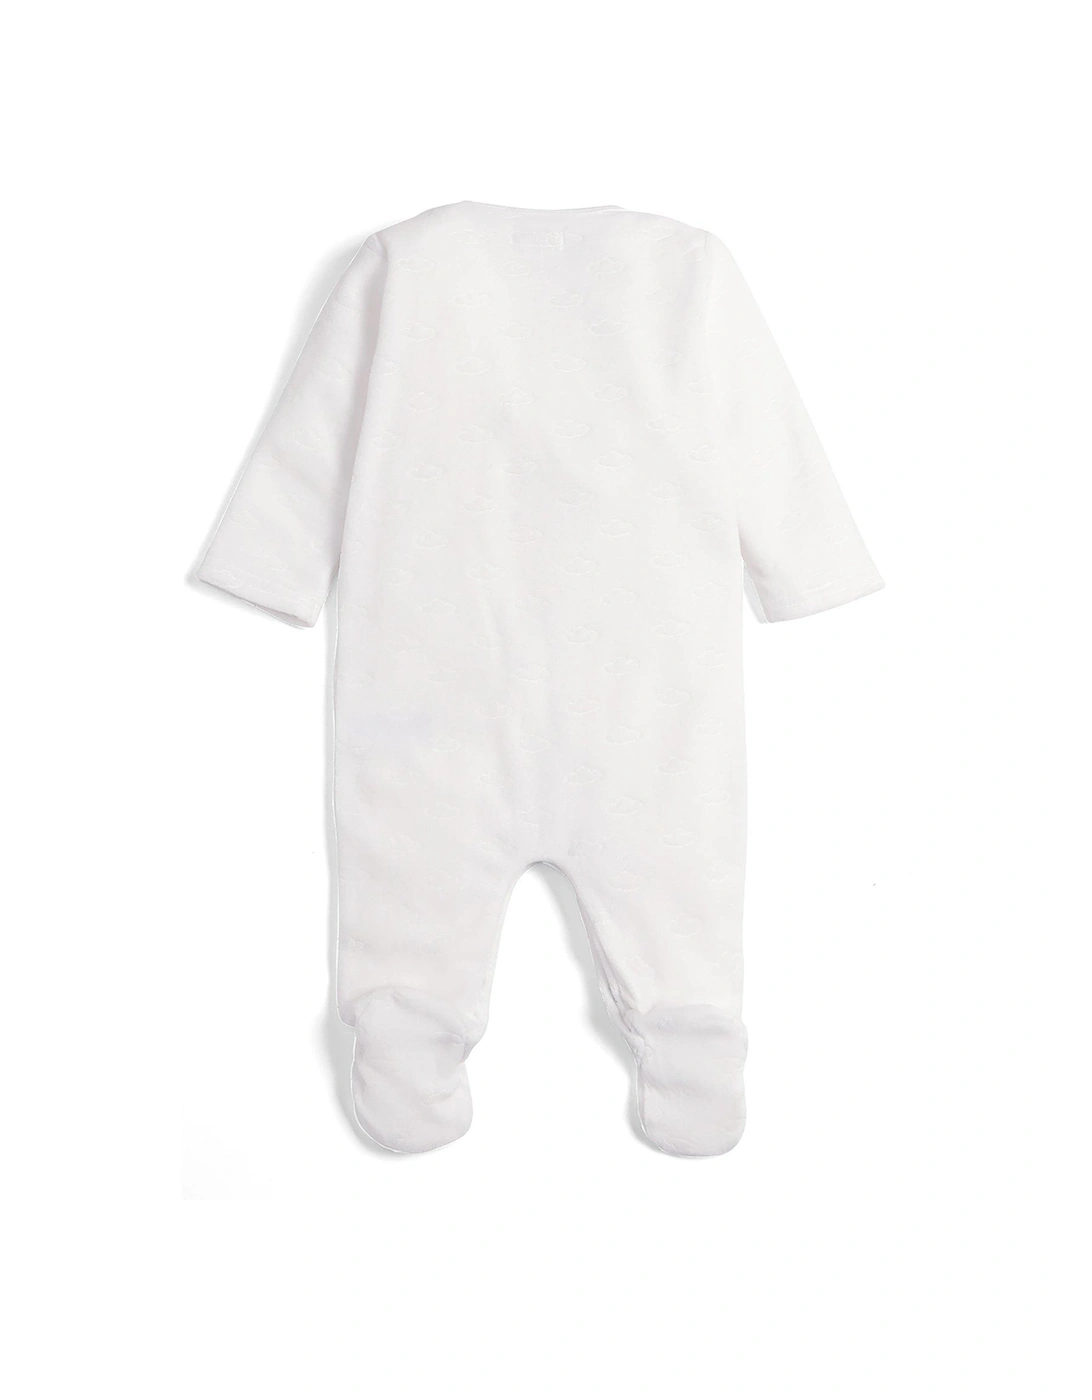 Unisex Baby Cloud Velour Sleepsuit With Hat - White